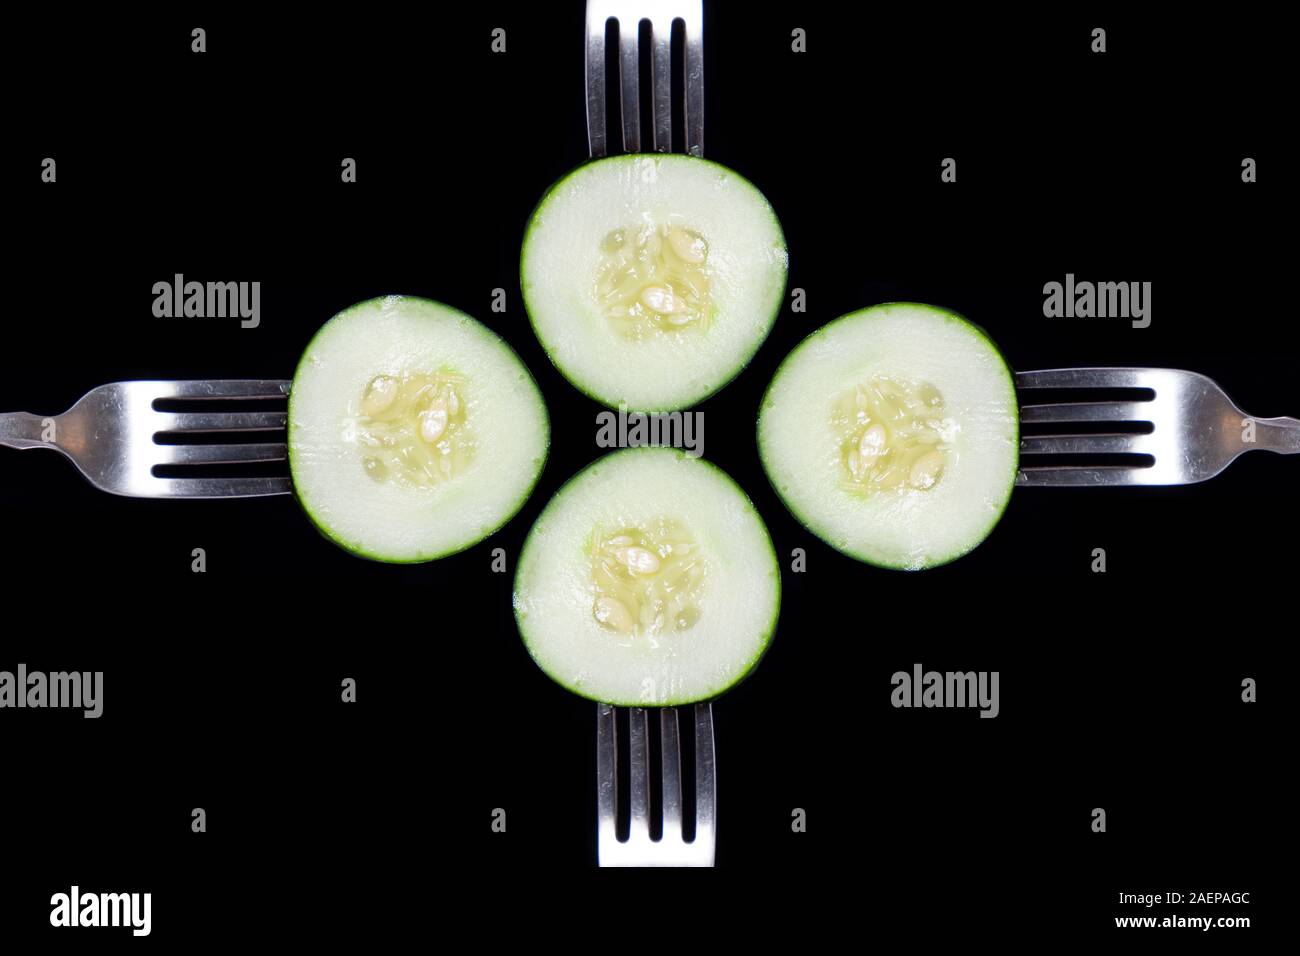 Cucumbers on forks.  Eat up and get all your nutrients! Stock Photo